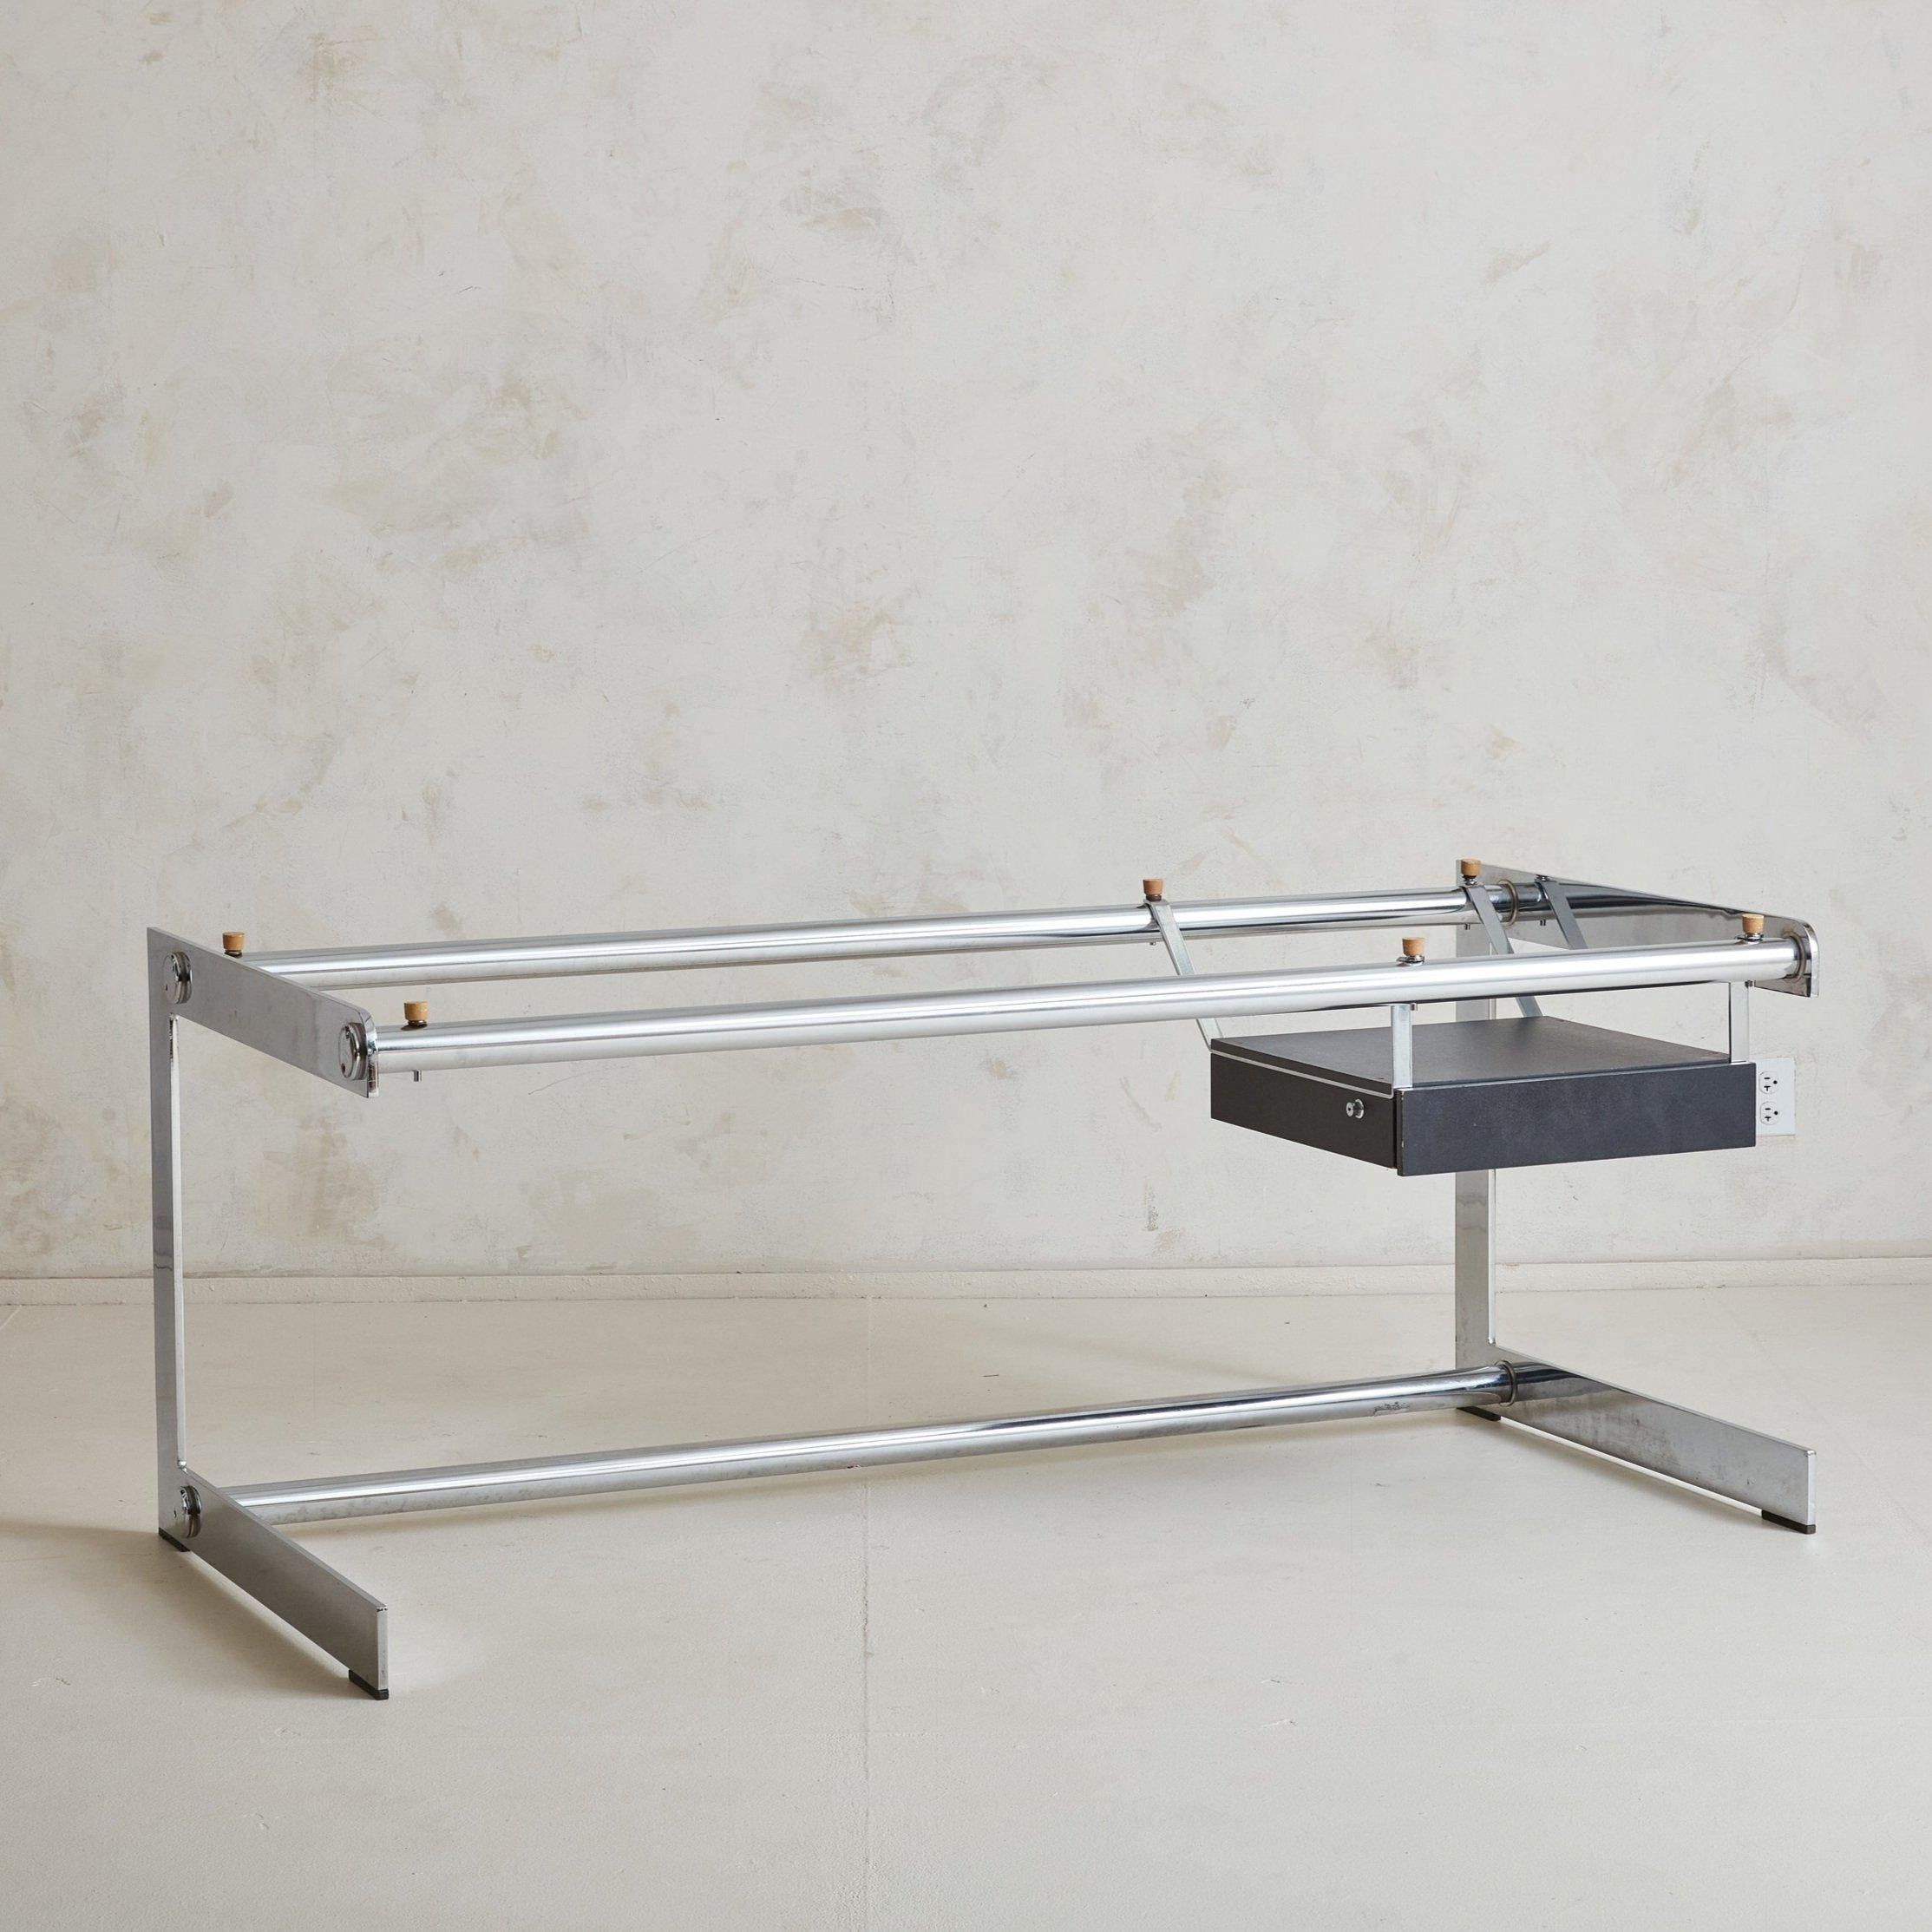 Mid-Century Modern Chrome Desk with Smoked Glass Top by Gilles Bouchez for Airborne, France 1970s For Sale